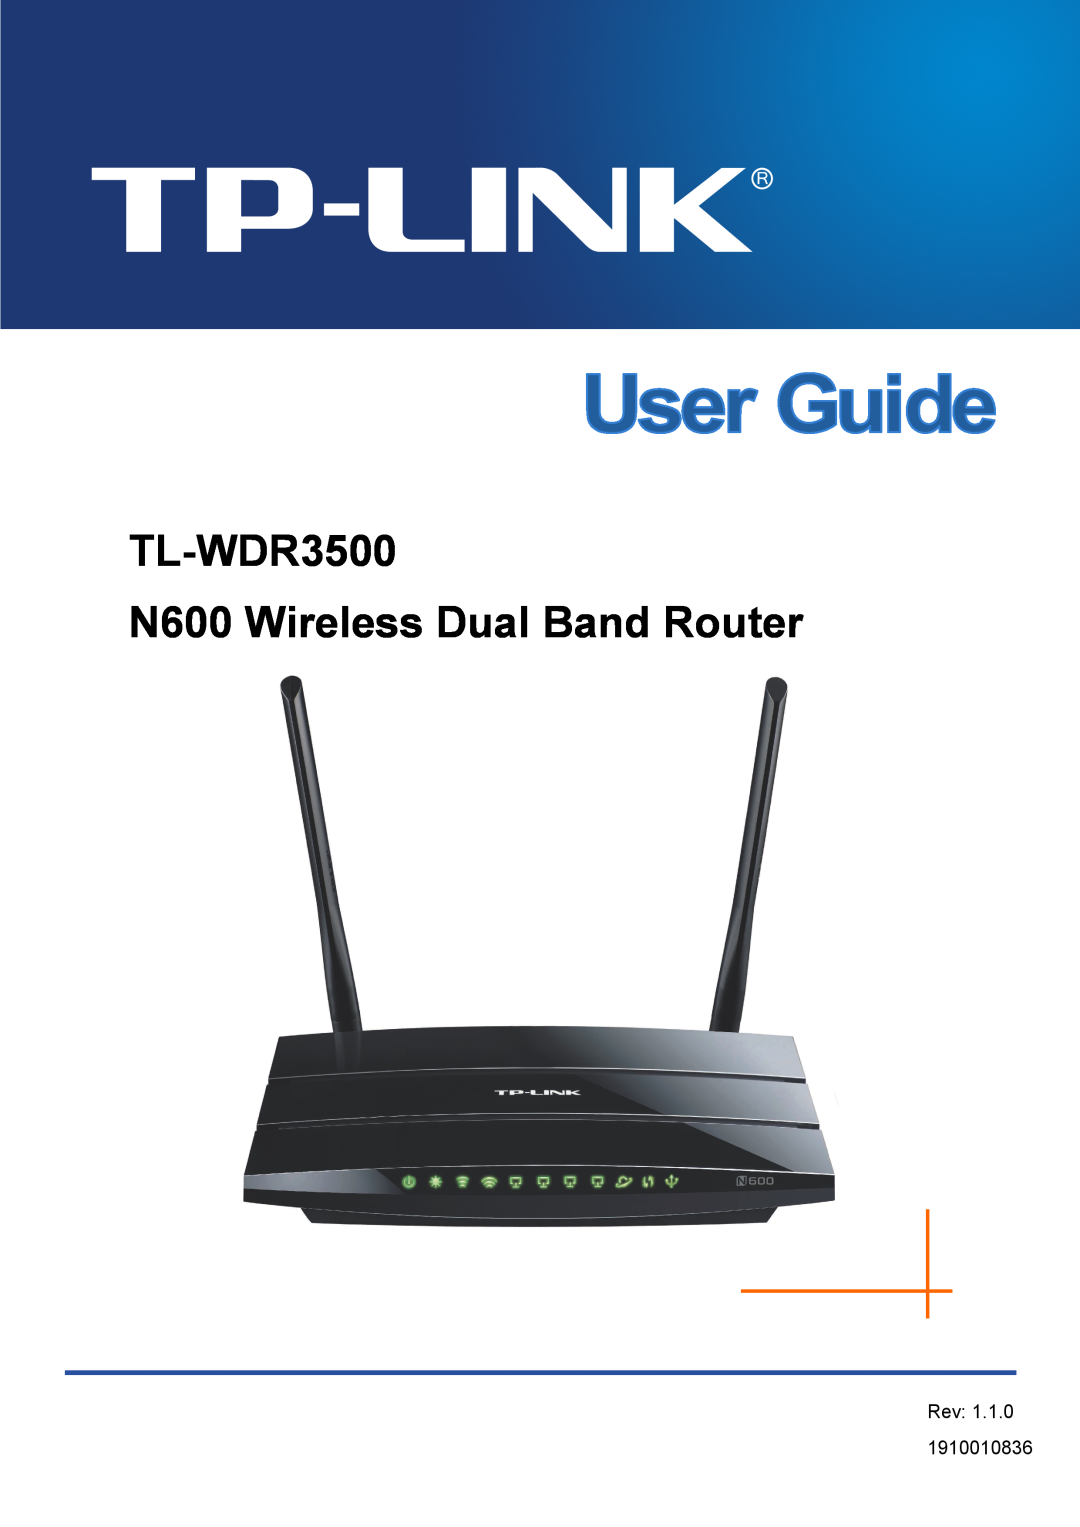 TP-Link manual TL-WDR3500 N600 Wireless Dual Band Router, Rev 1.1.0 